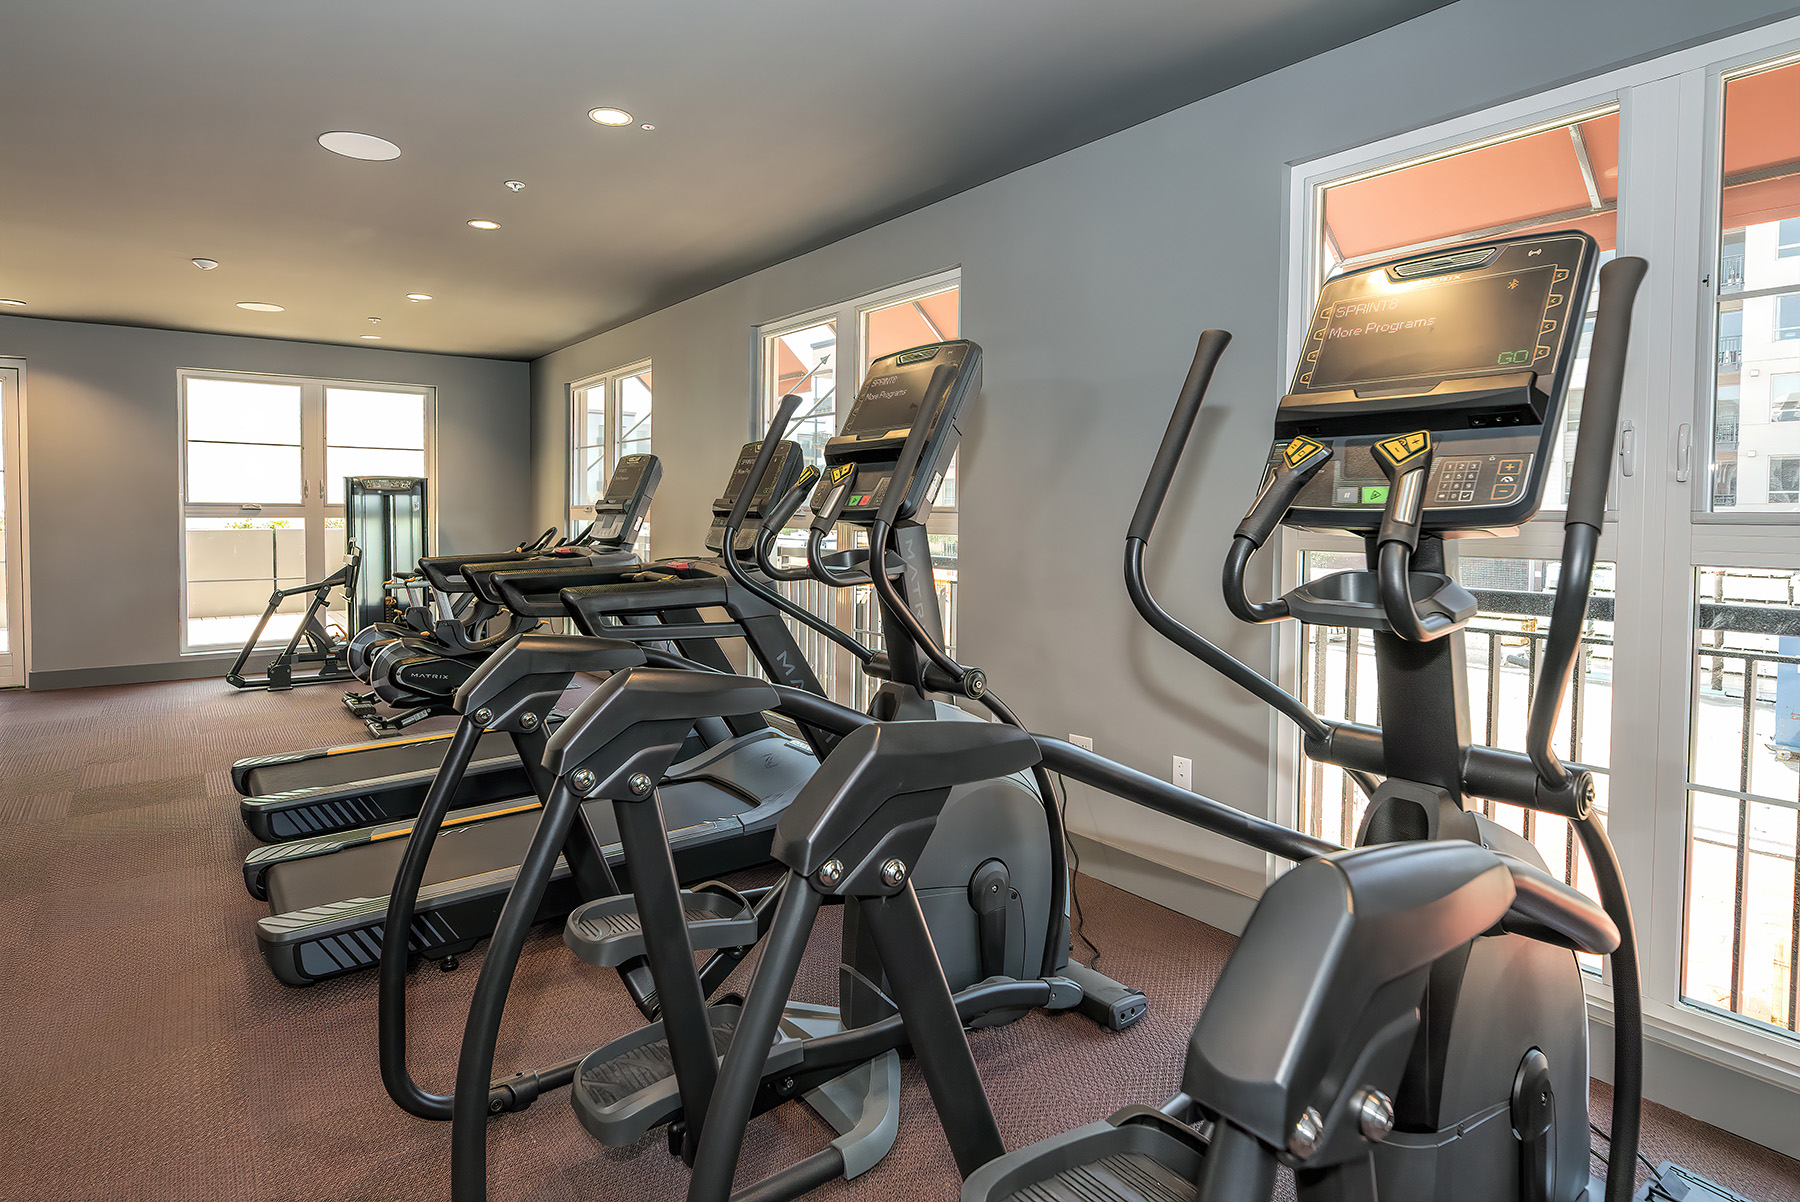 Apartments for Rent San Mateo - Azara - Fitness Center with Cardio Equipment and Windows.